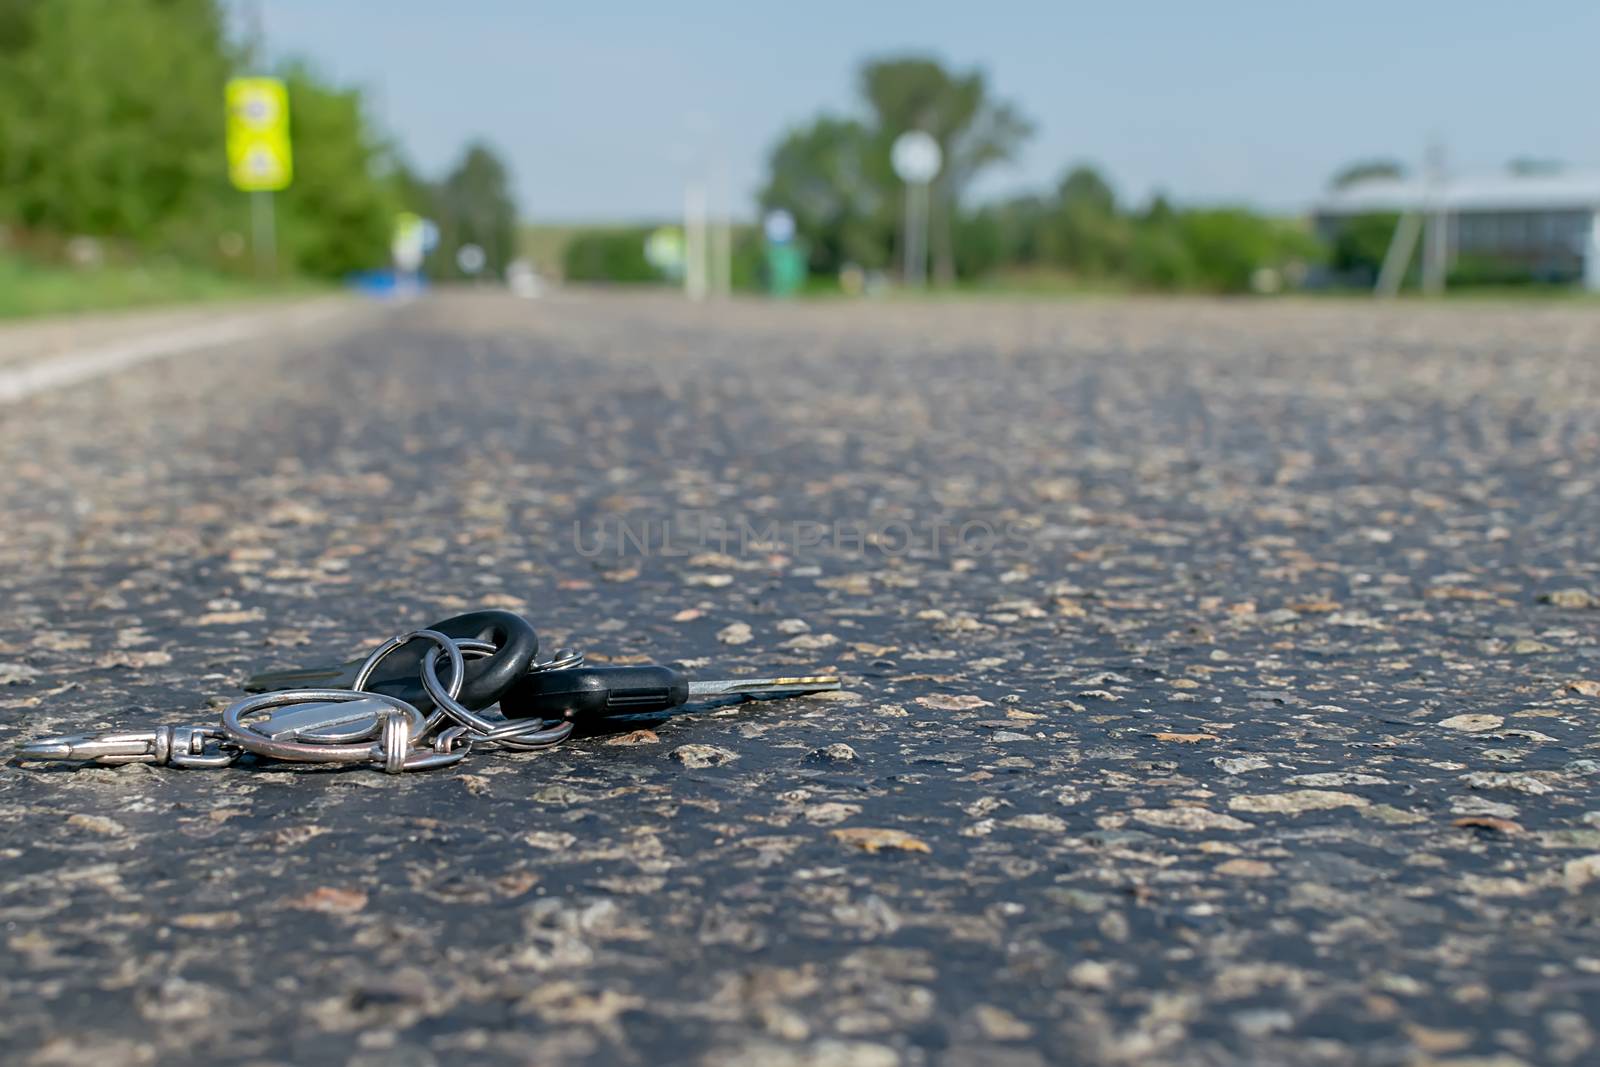 Lost a bunch of keys lying on the asphalt surface of the roadway by jk3030